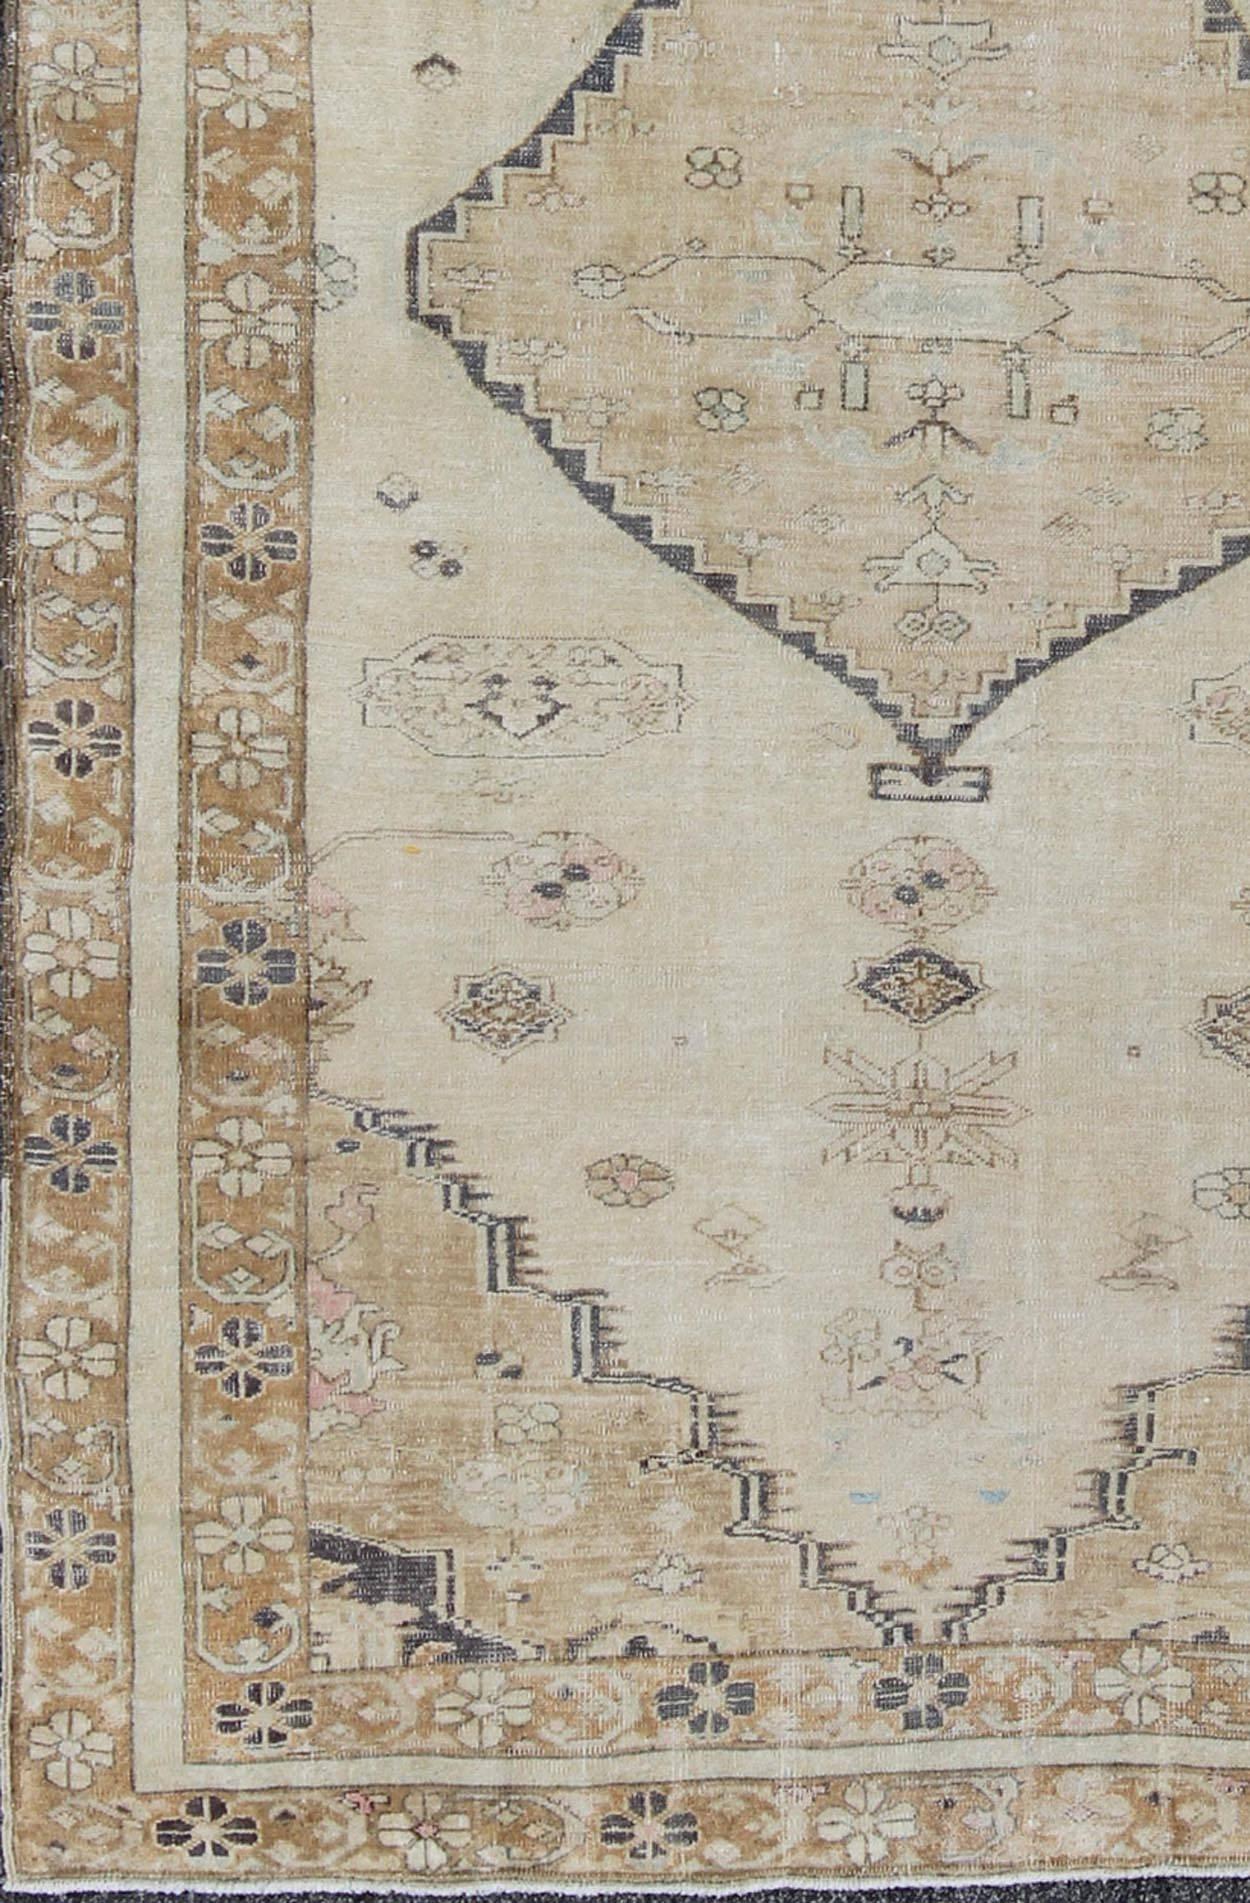 Etched medallion vintage rug Oushak from Turkey with neutral tones, rug en-141811, country of origin / type: Turkey / Oushak, circa 1950.

This striking vintage Turkish Oushak rug bears an cream-colored body that is highlighted by a dazzling, etched